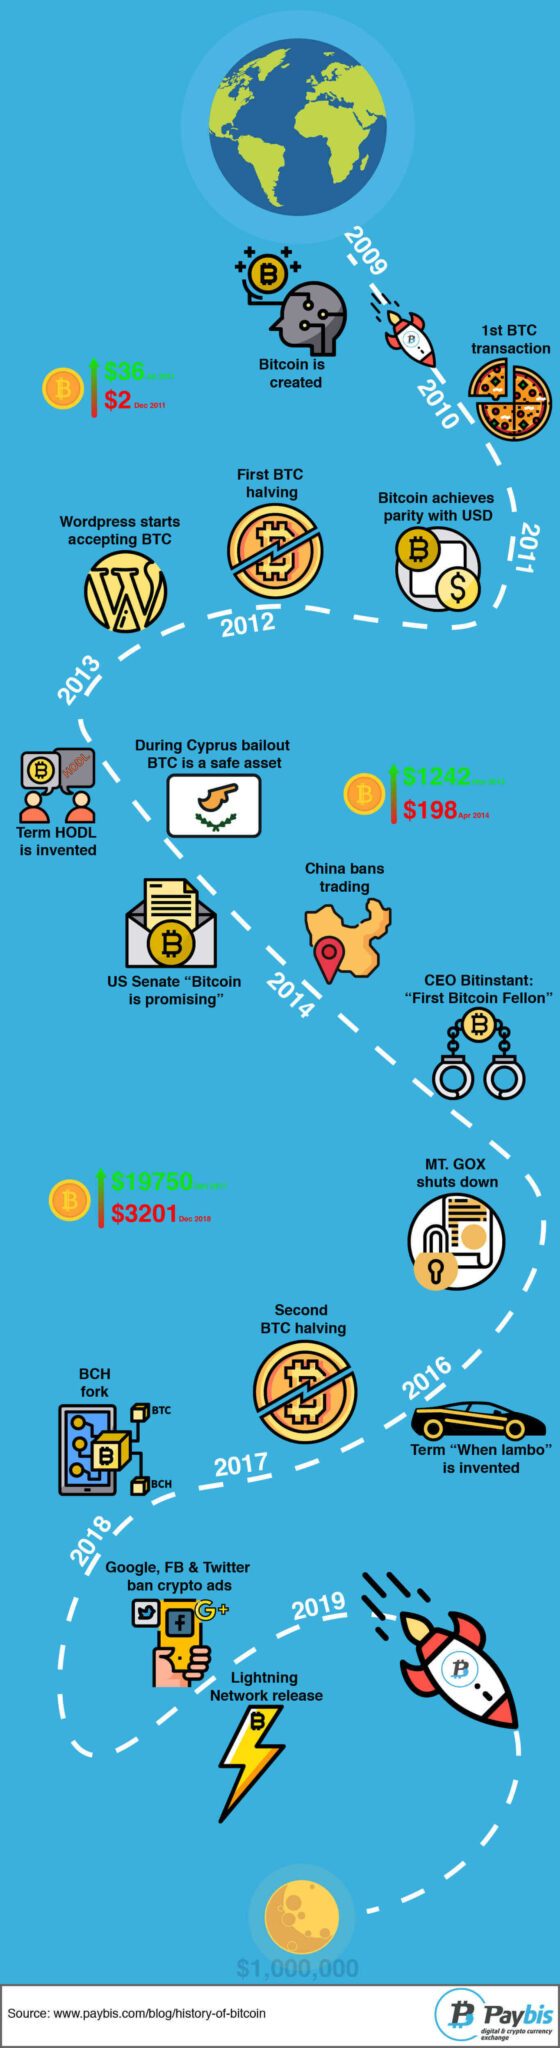 History of Bitcoin - Infographic